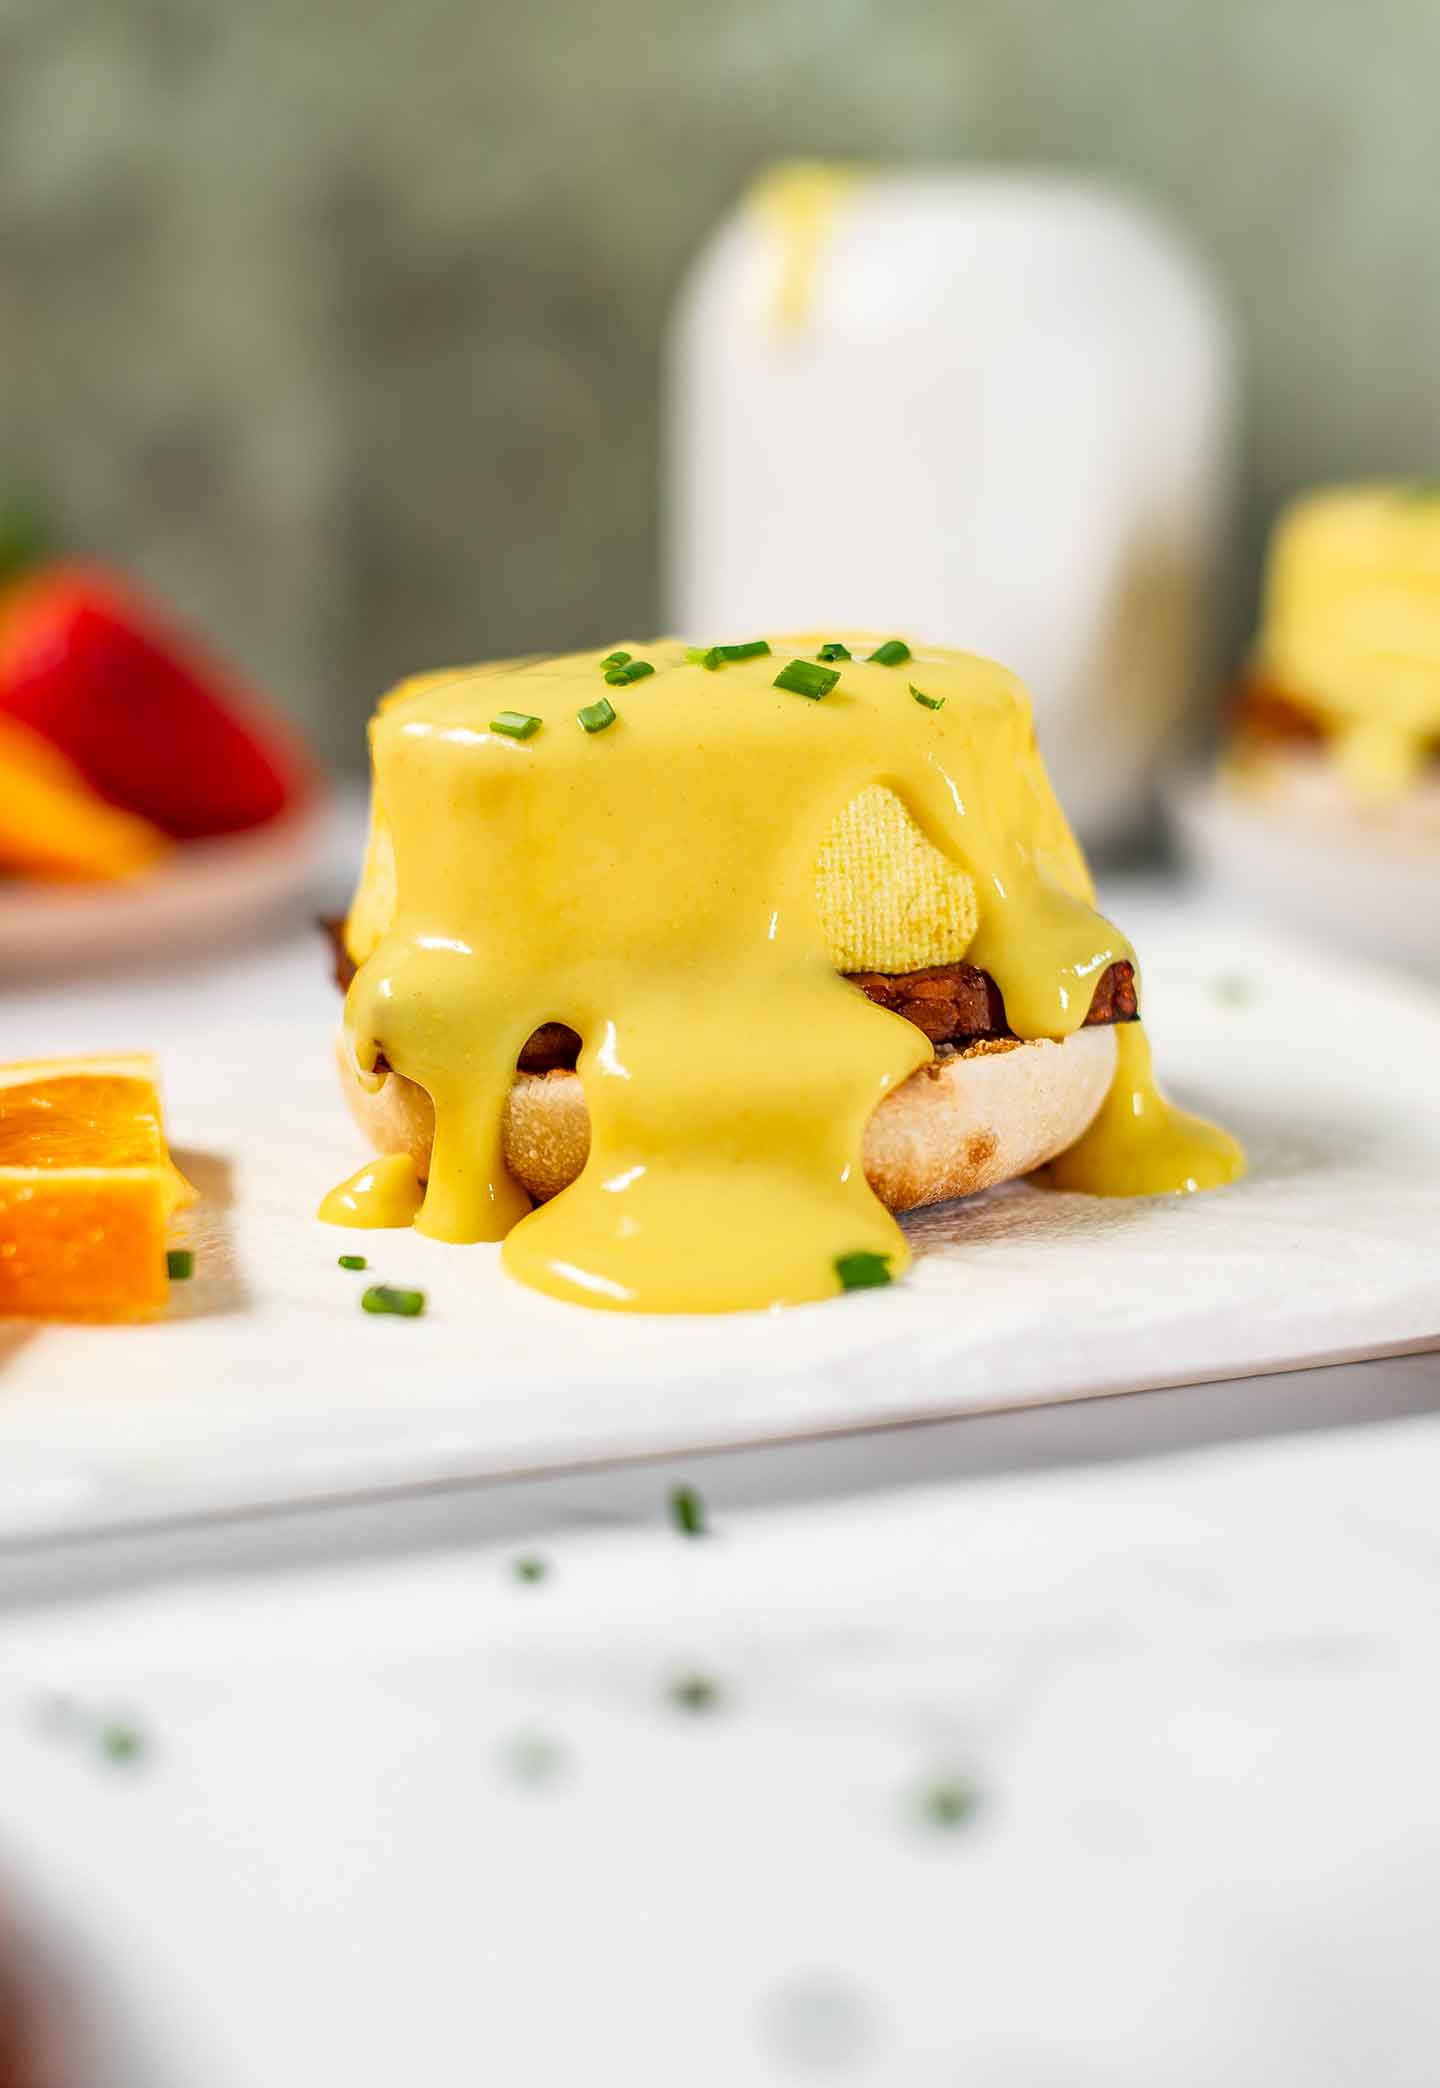 Thick vegan hollandaise sauce, tinged yellow, runs over top and down the sides of a vegan eggs benedict.